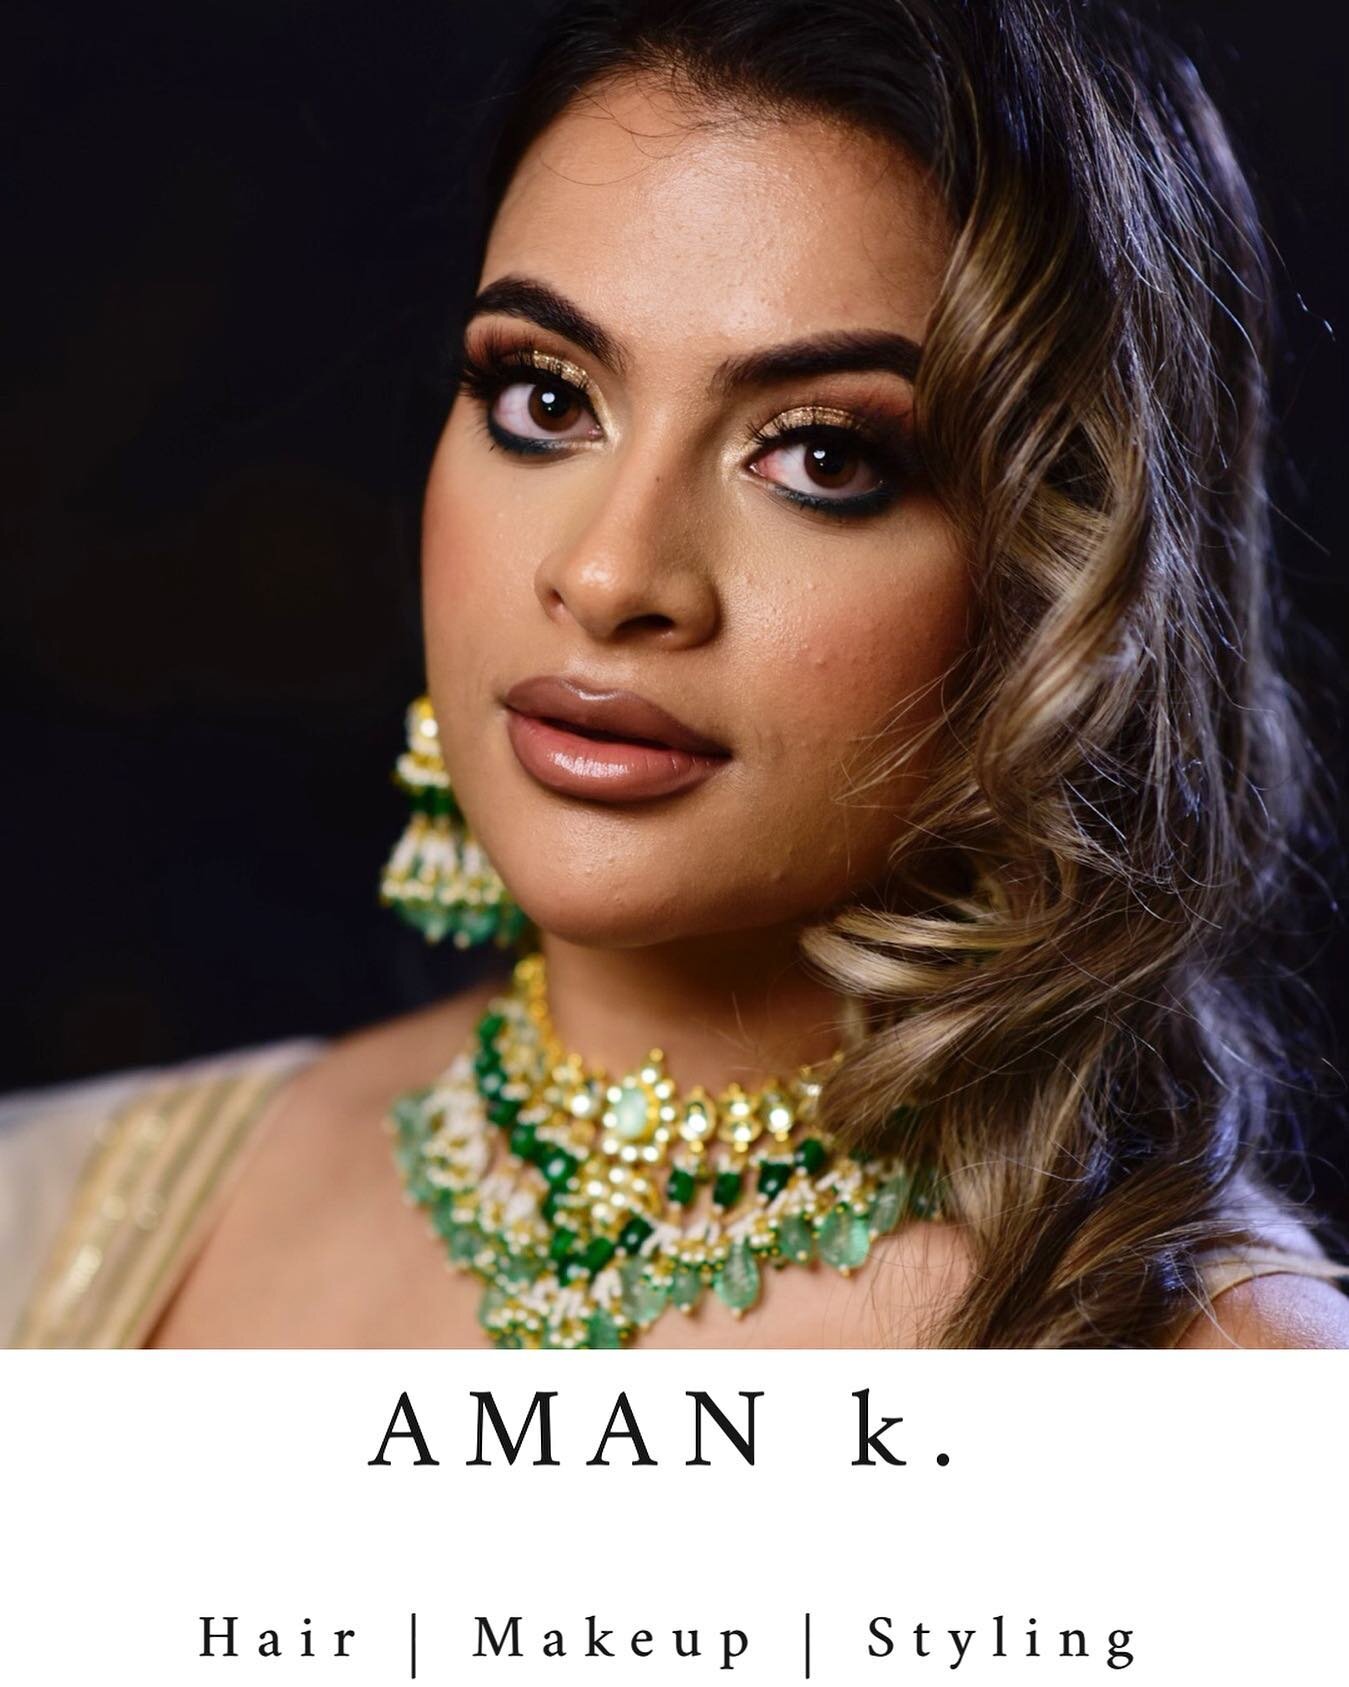 🚨 New Stylist! 🚨 

💄Stylist: AMAN k.
📍Location: W. LONDON - available to travel ----------------------------------------------------------------------------------
To BOOK 👉🏽 Email us at promakeuplondonstylists@gmail.com ------------------------